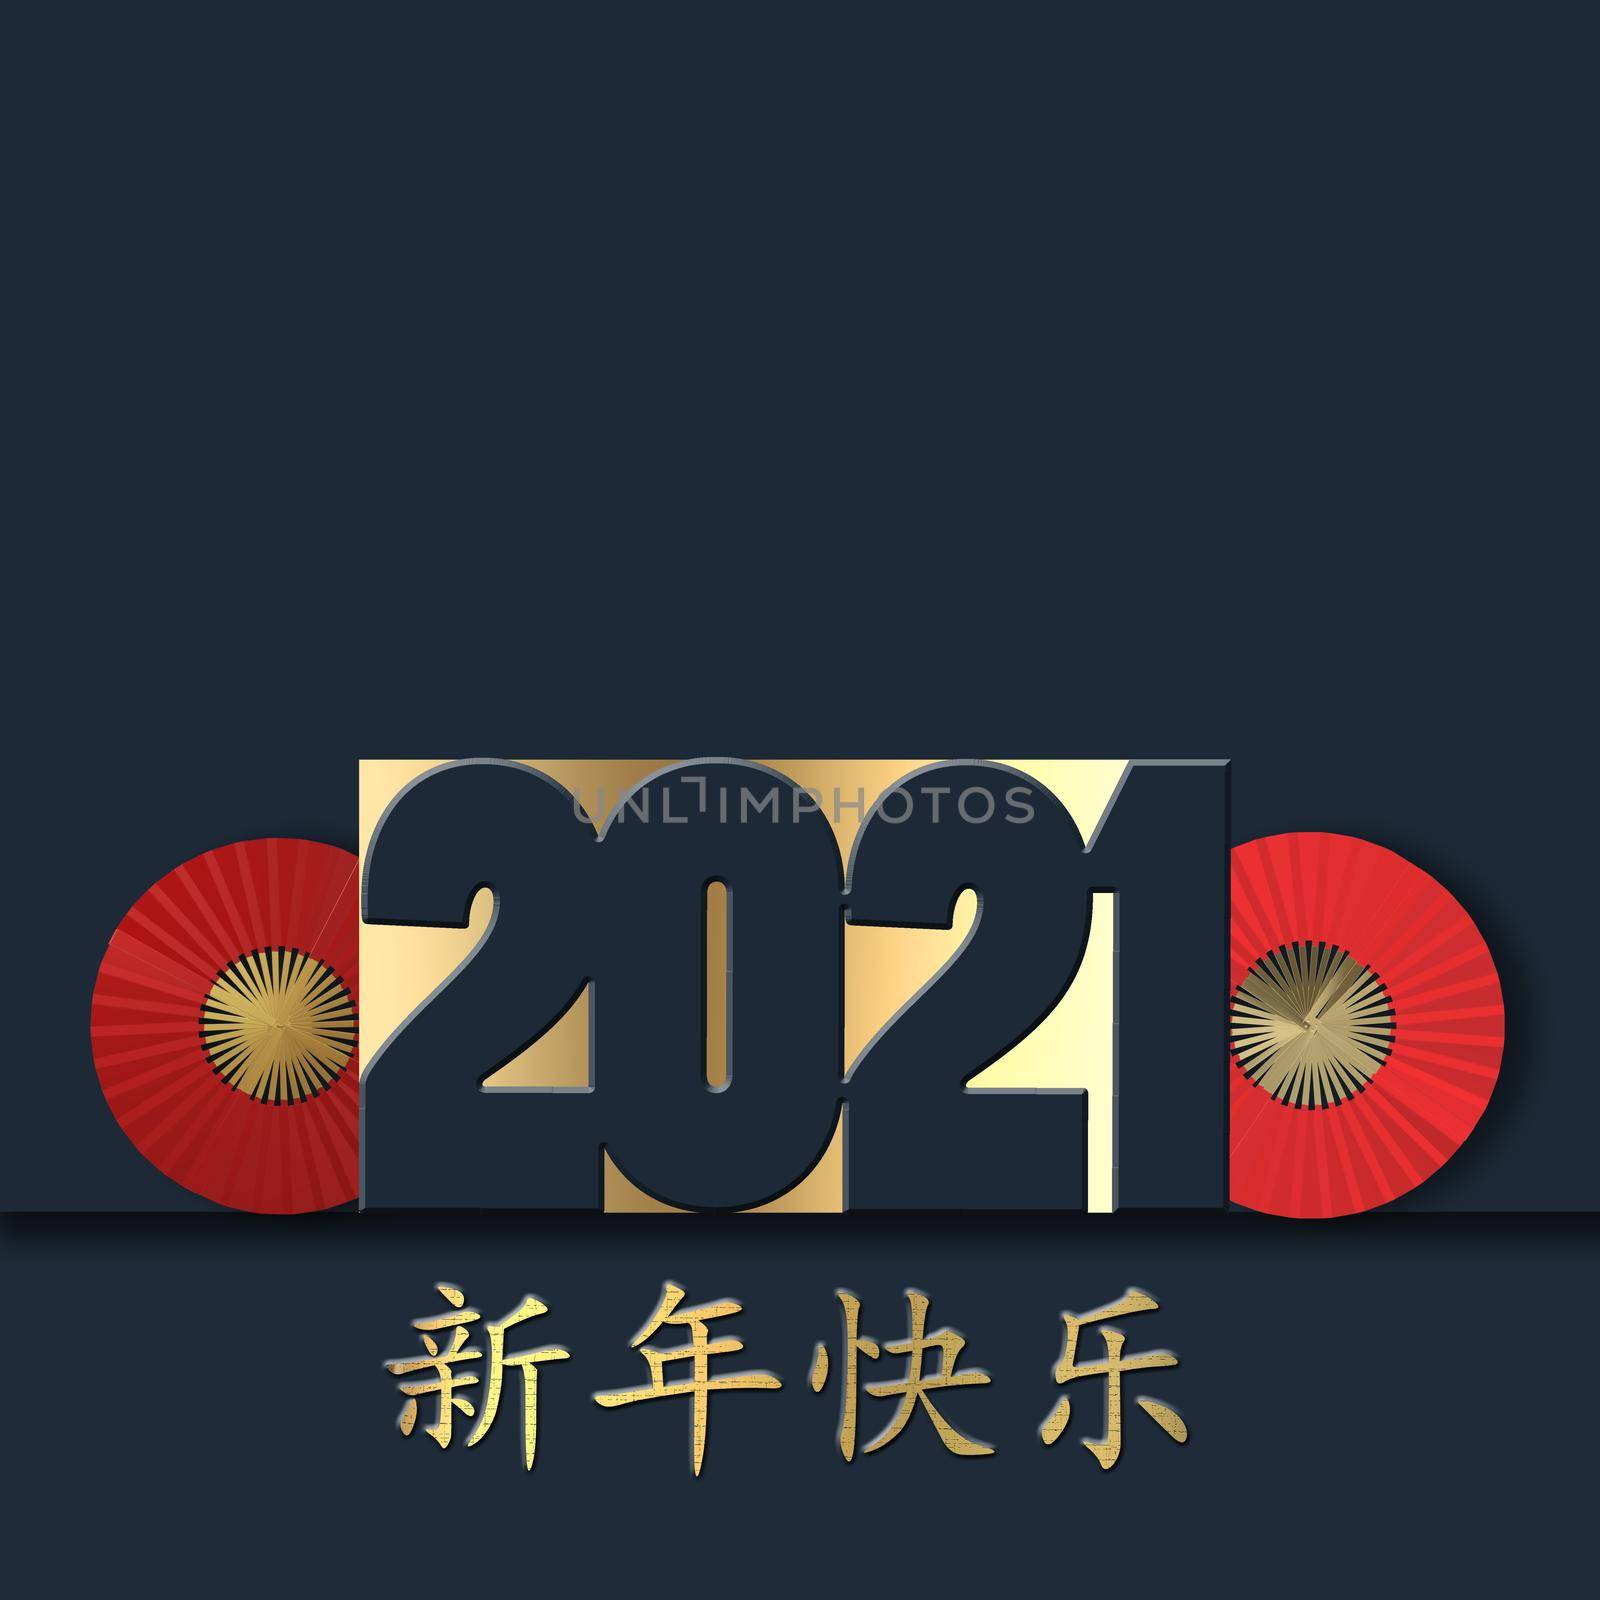 Chinese 2021 New Year design by NelliPolk